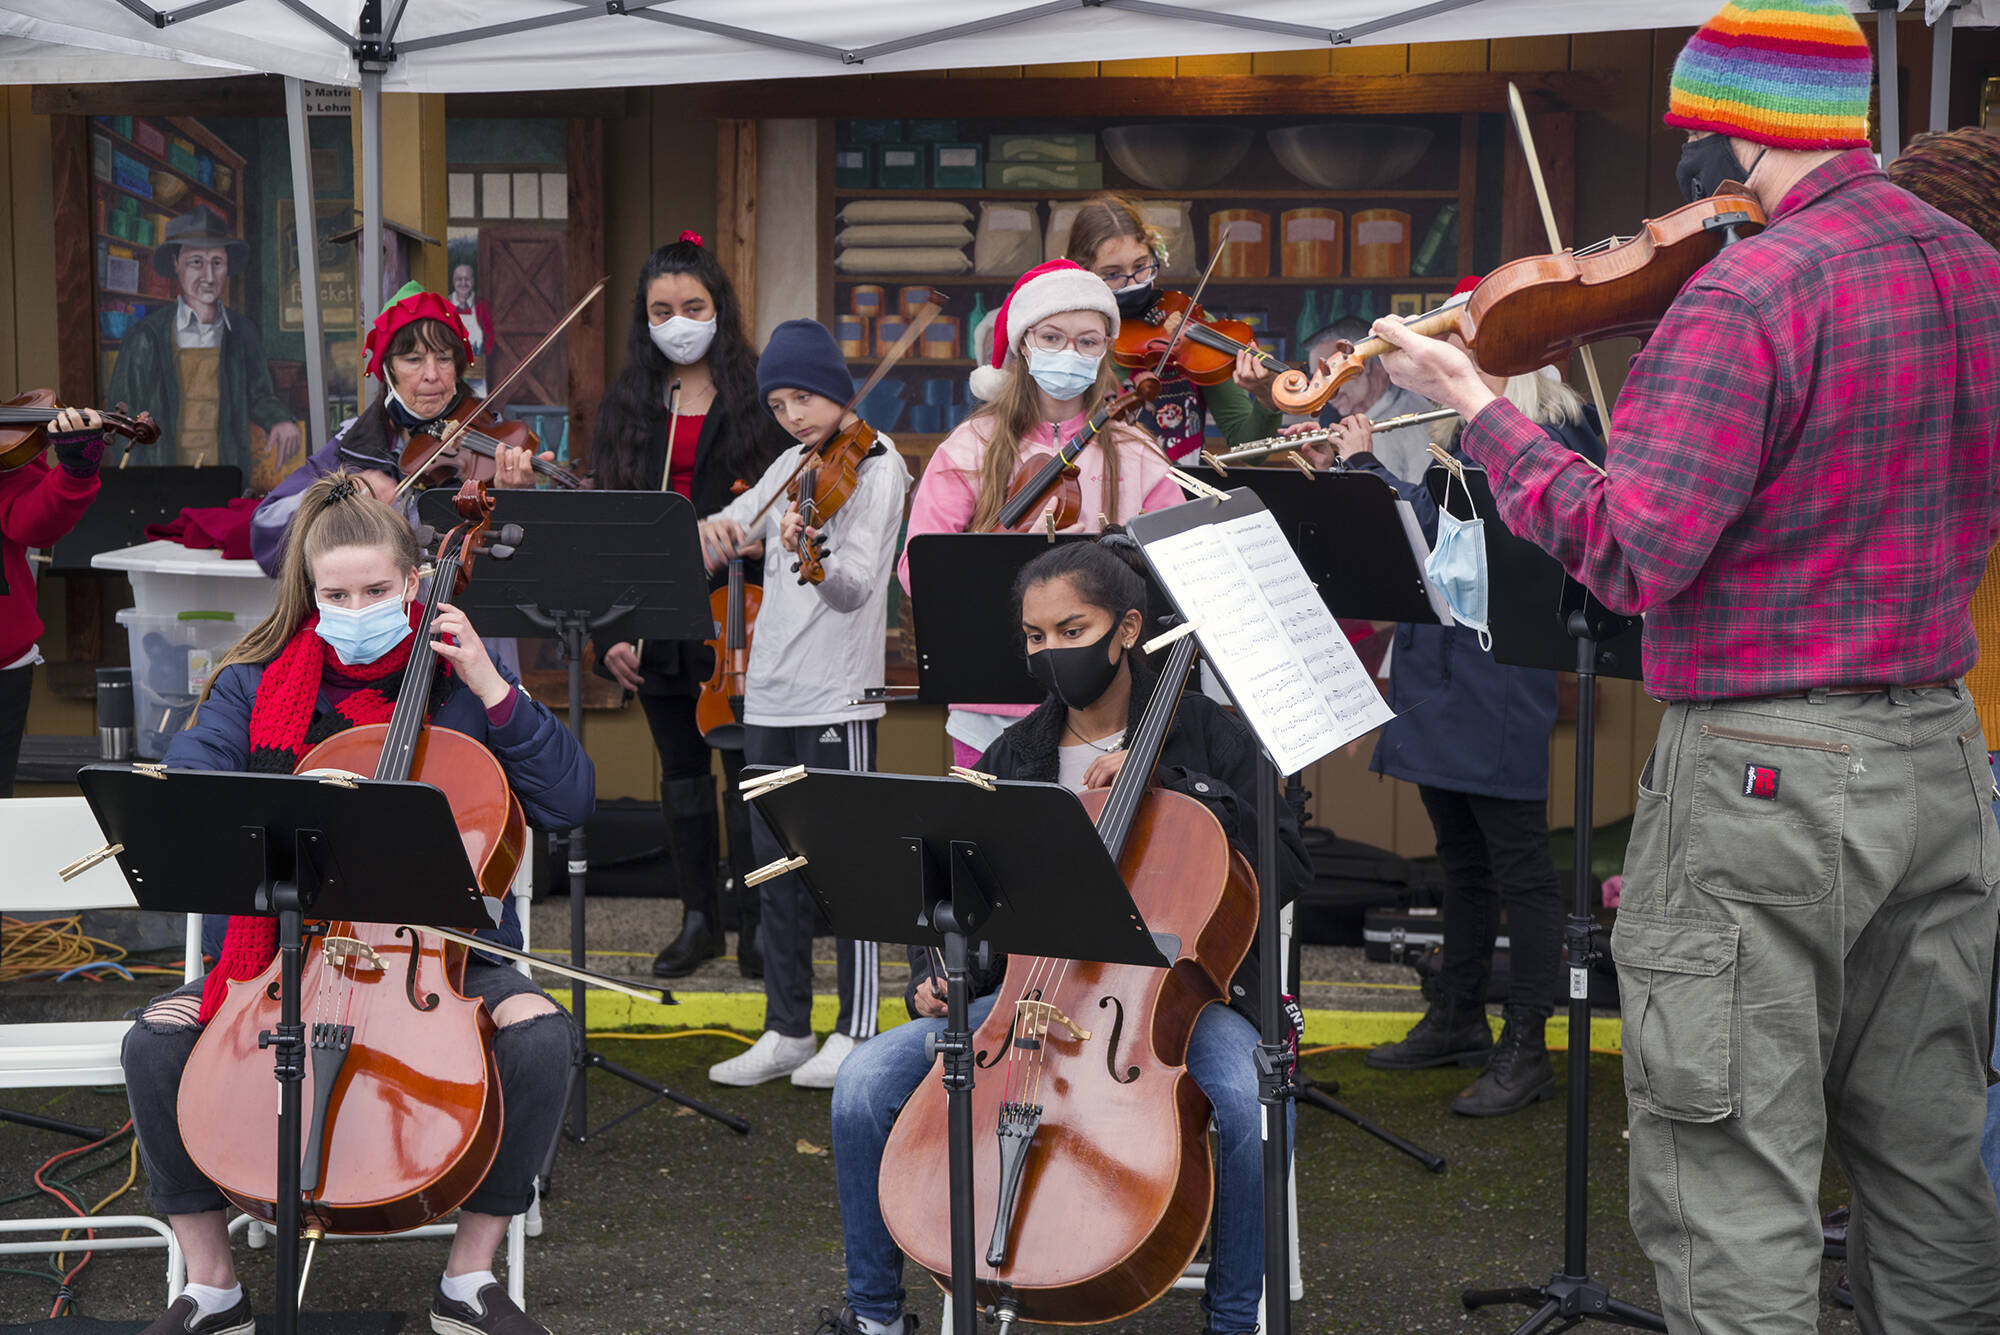 Sequim Gazette file photo by Emily Matthiessen
Members of Sequim Community Orchestra, with youth from their strings program, play holiday favorites at the Home Town Holidays event in Sequim in 2021.